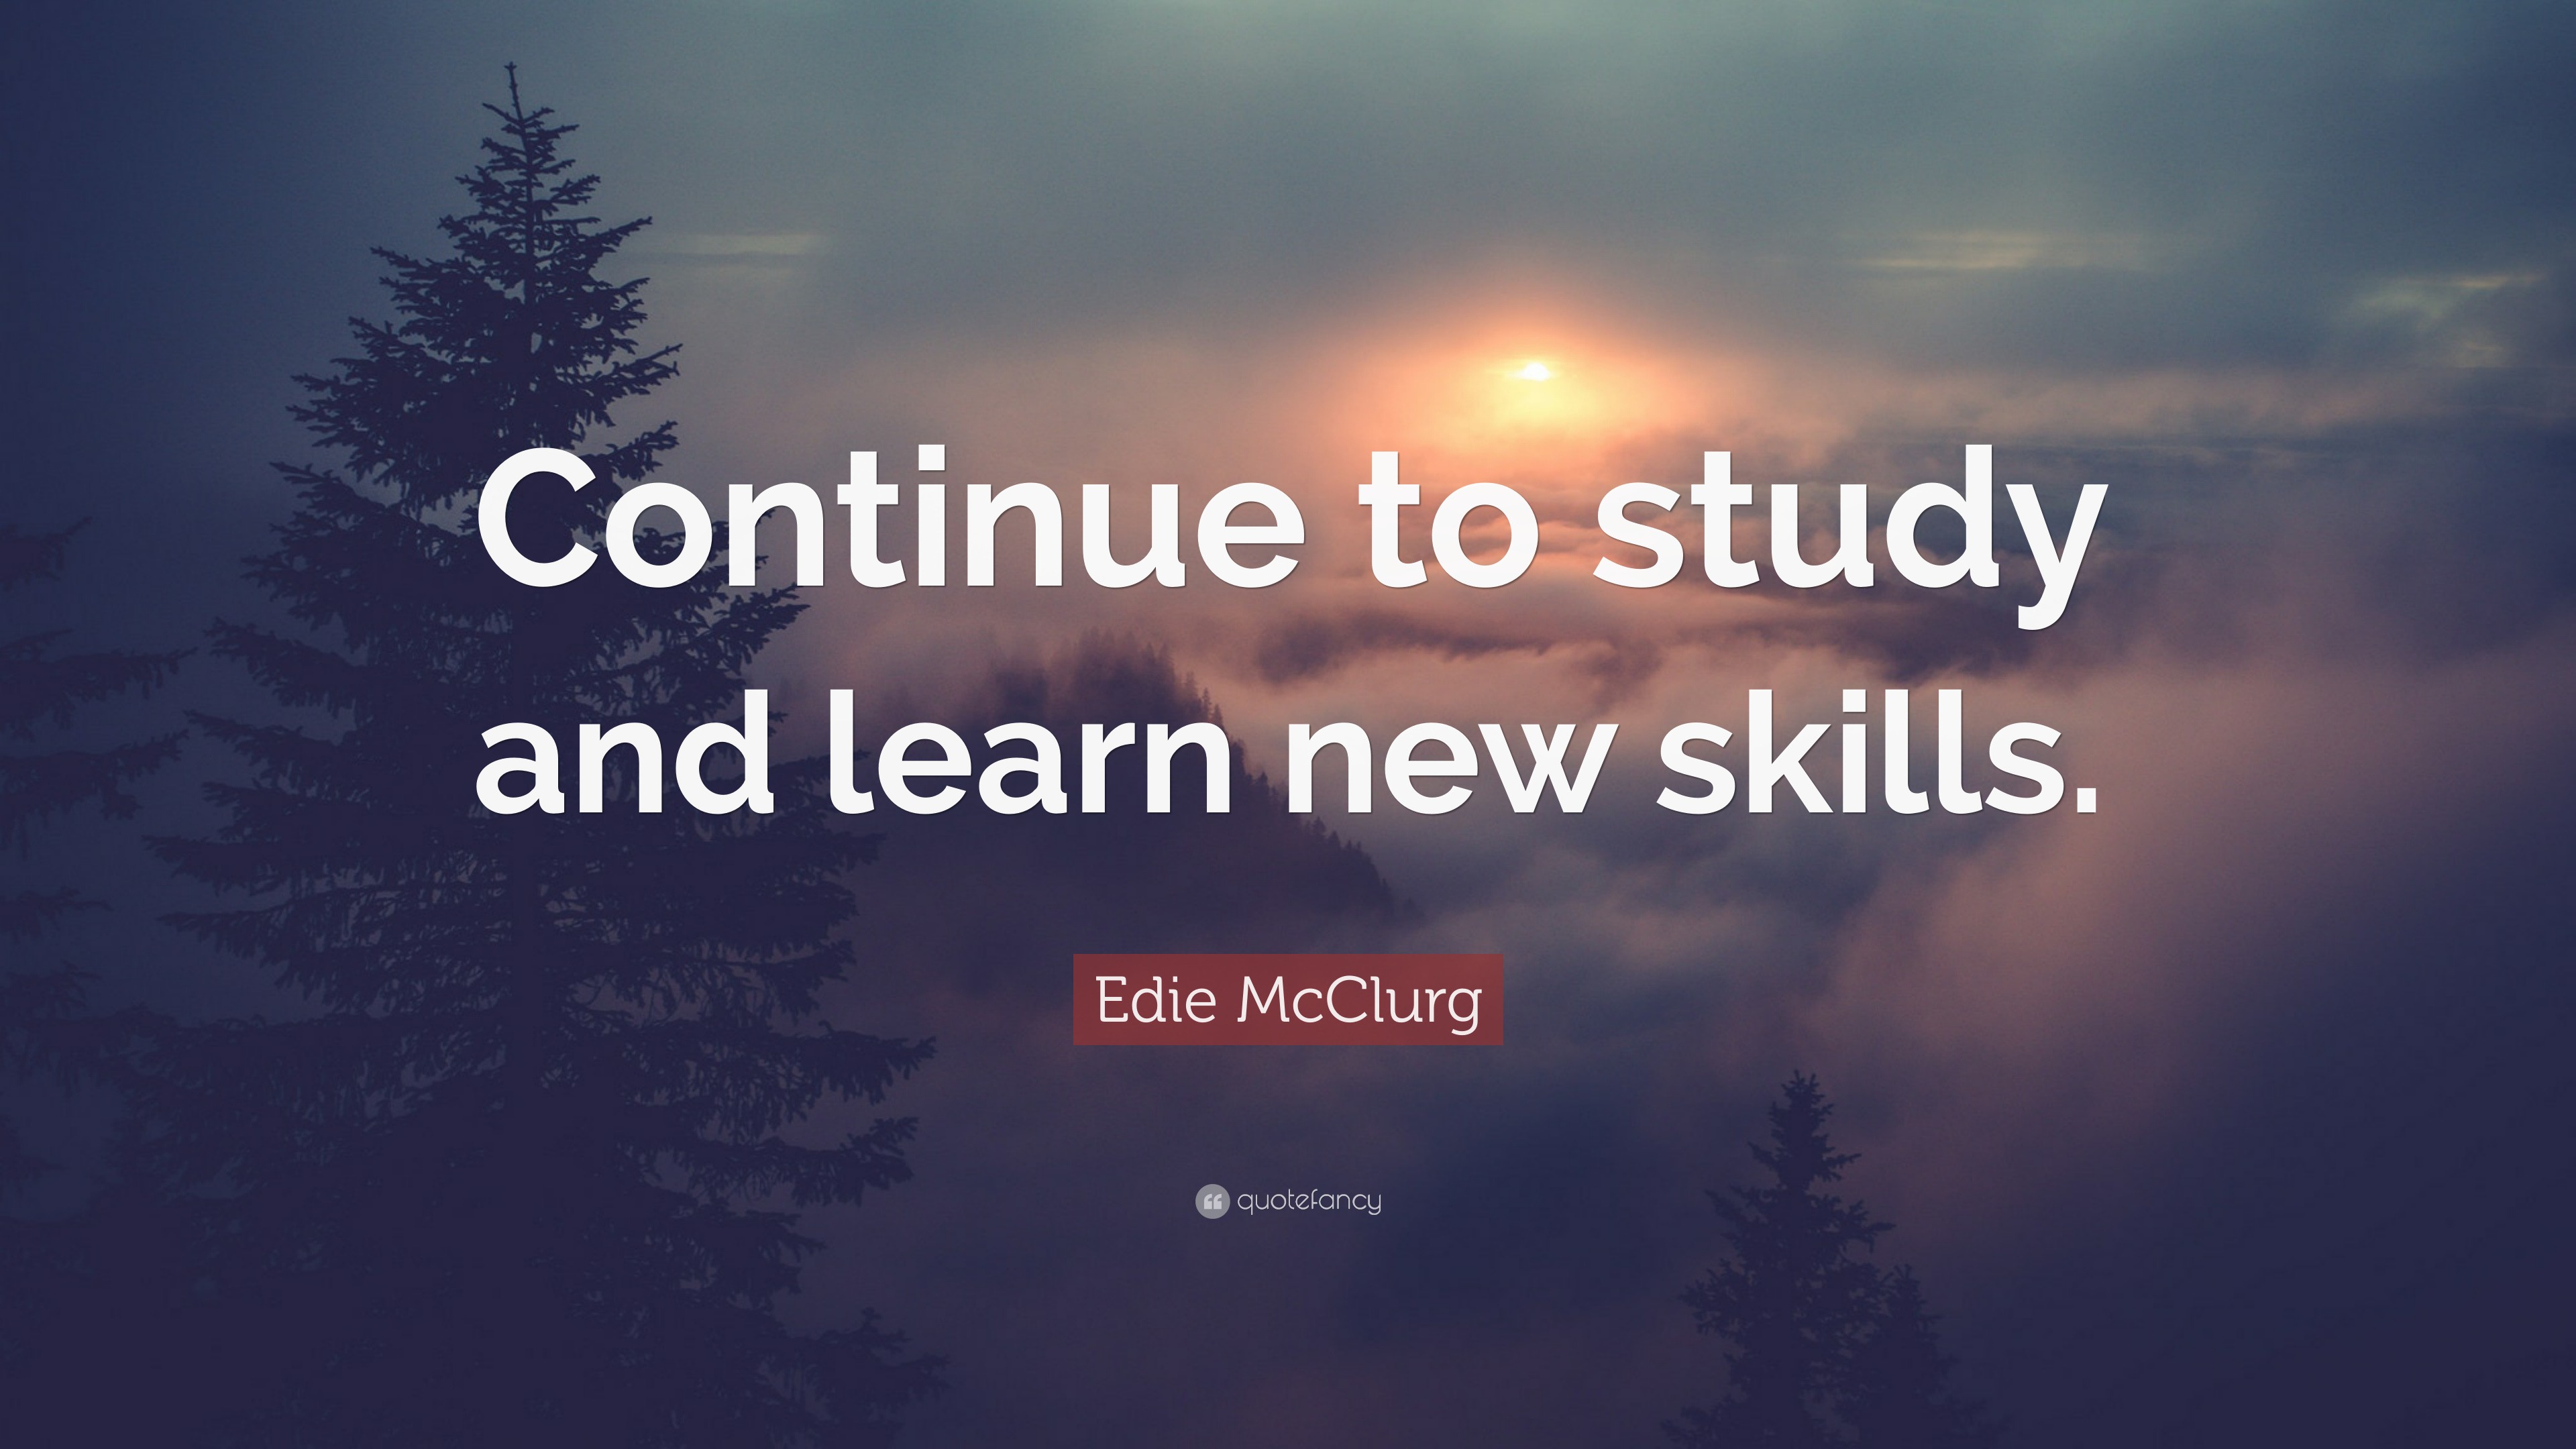 essay on learning a new skill